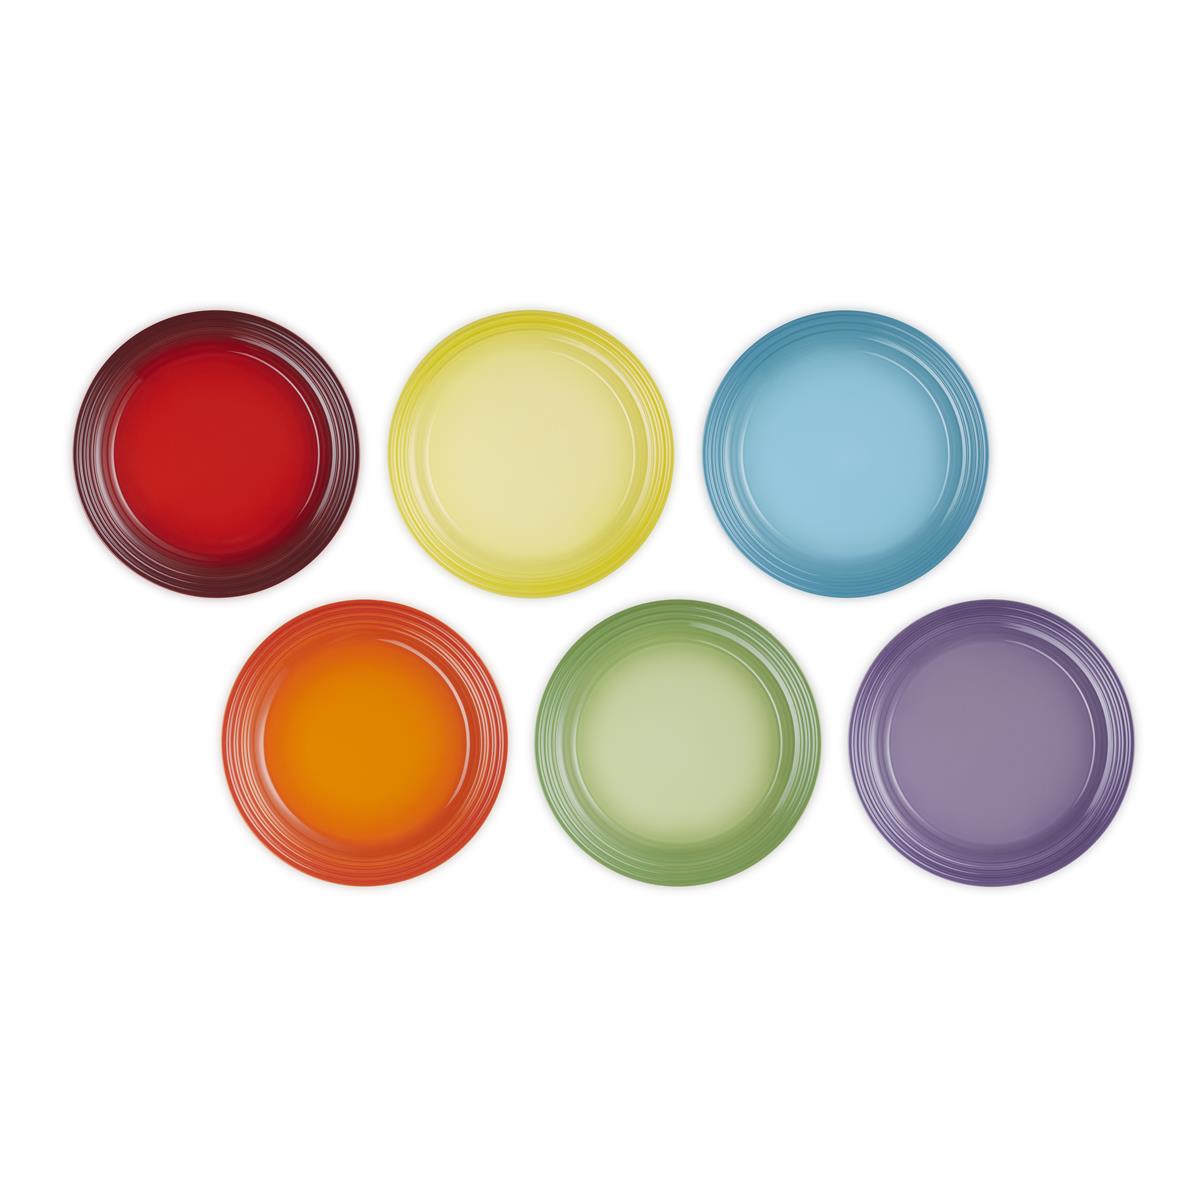 Le Creuset Stoneware Rainbow Set Of 6 Dinner Plates Questions & Answers